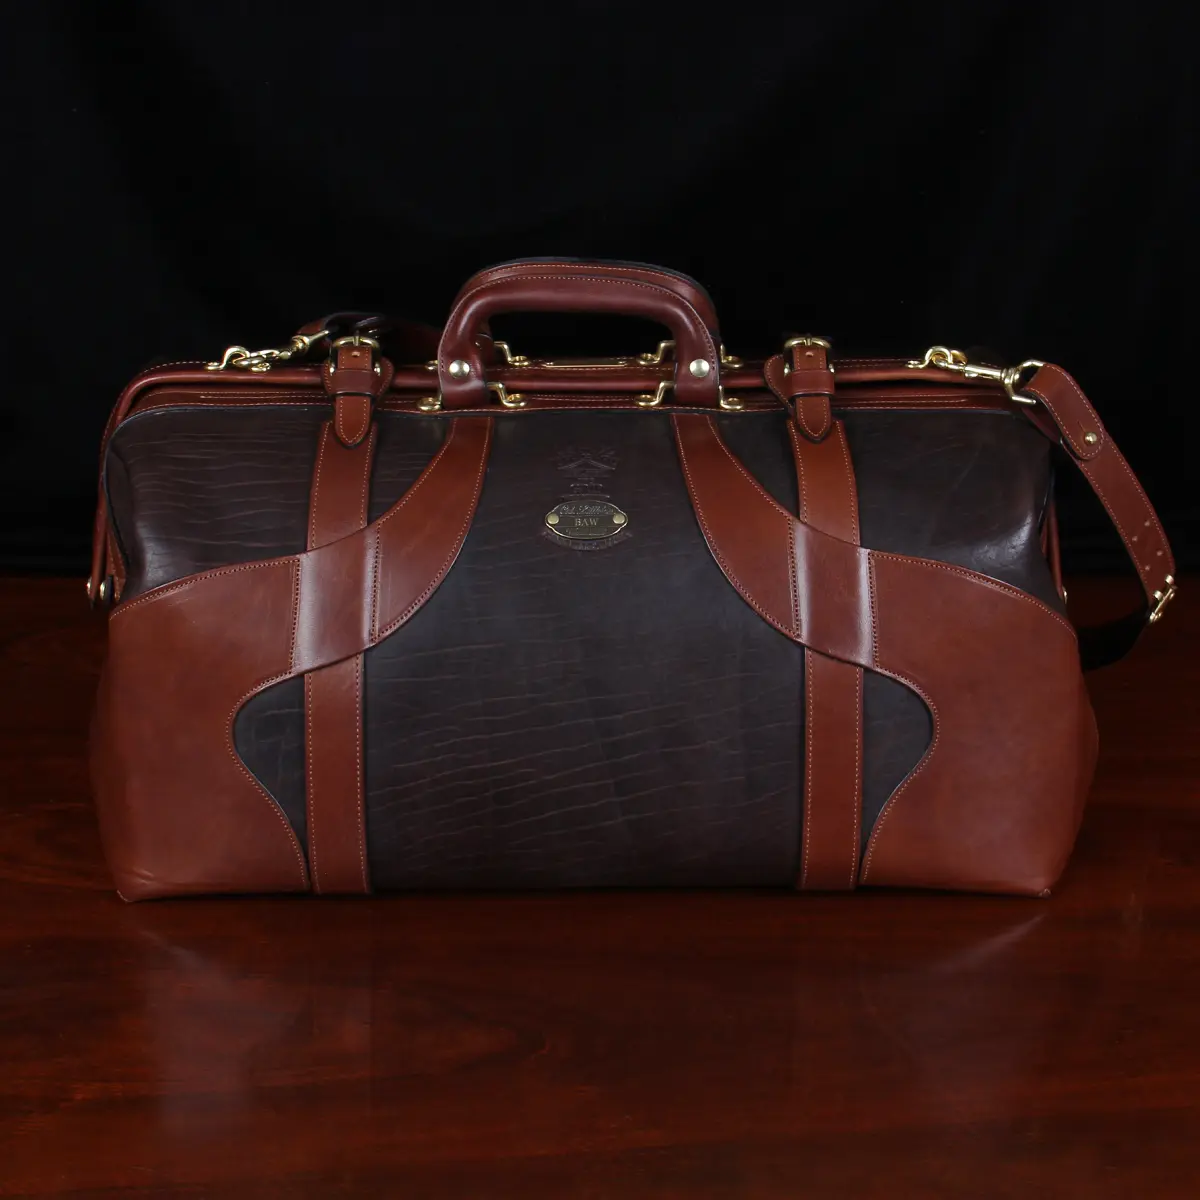 WILLIAM LEATHER ZIPPERED DUFFLE BAG, MADE IN USA